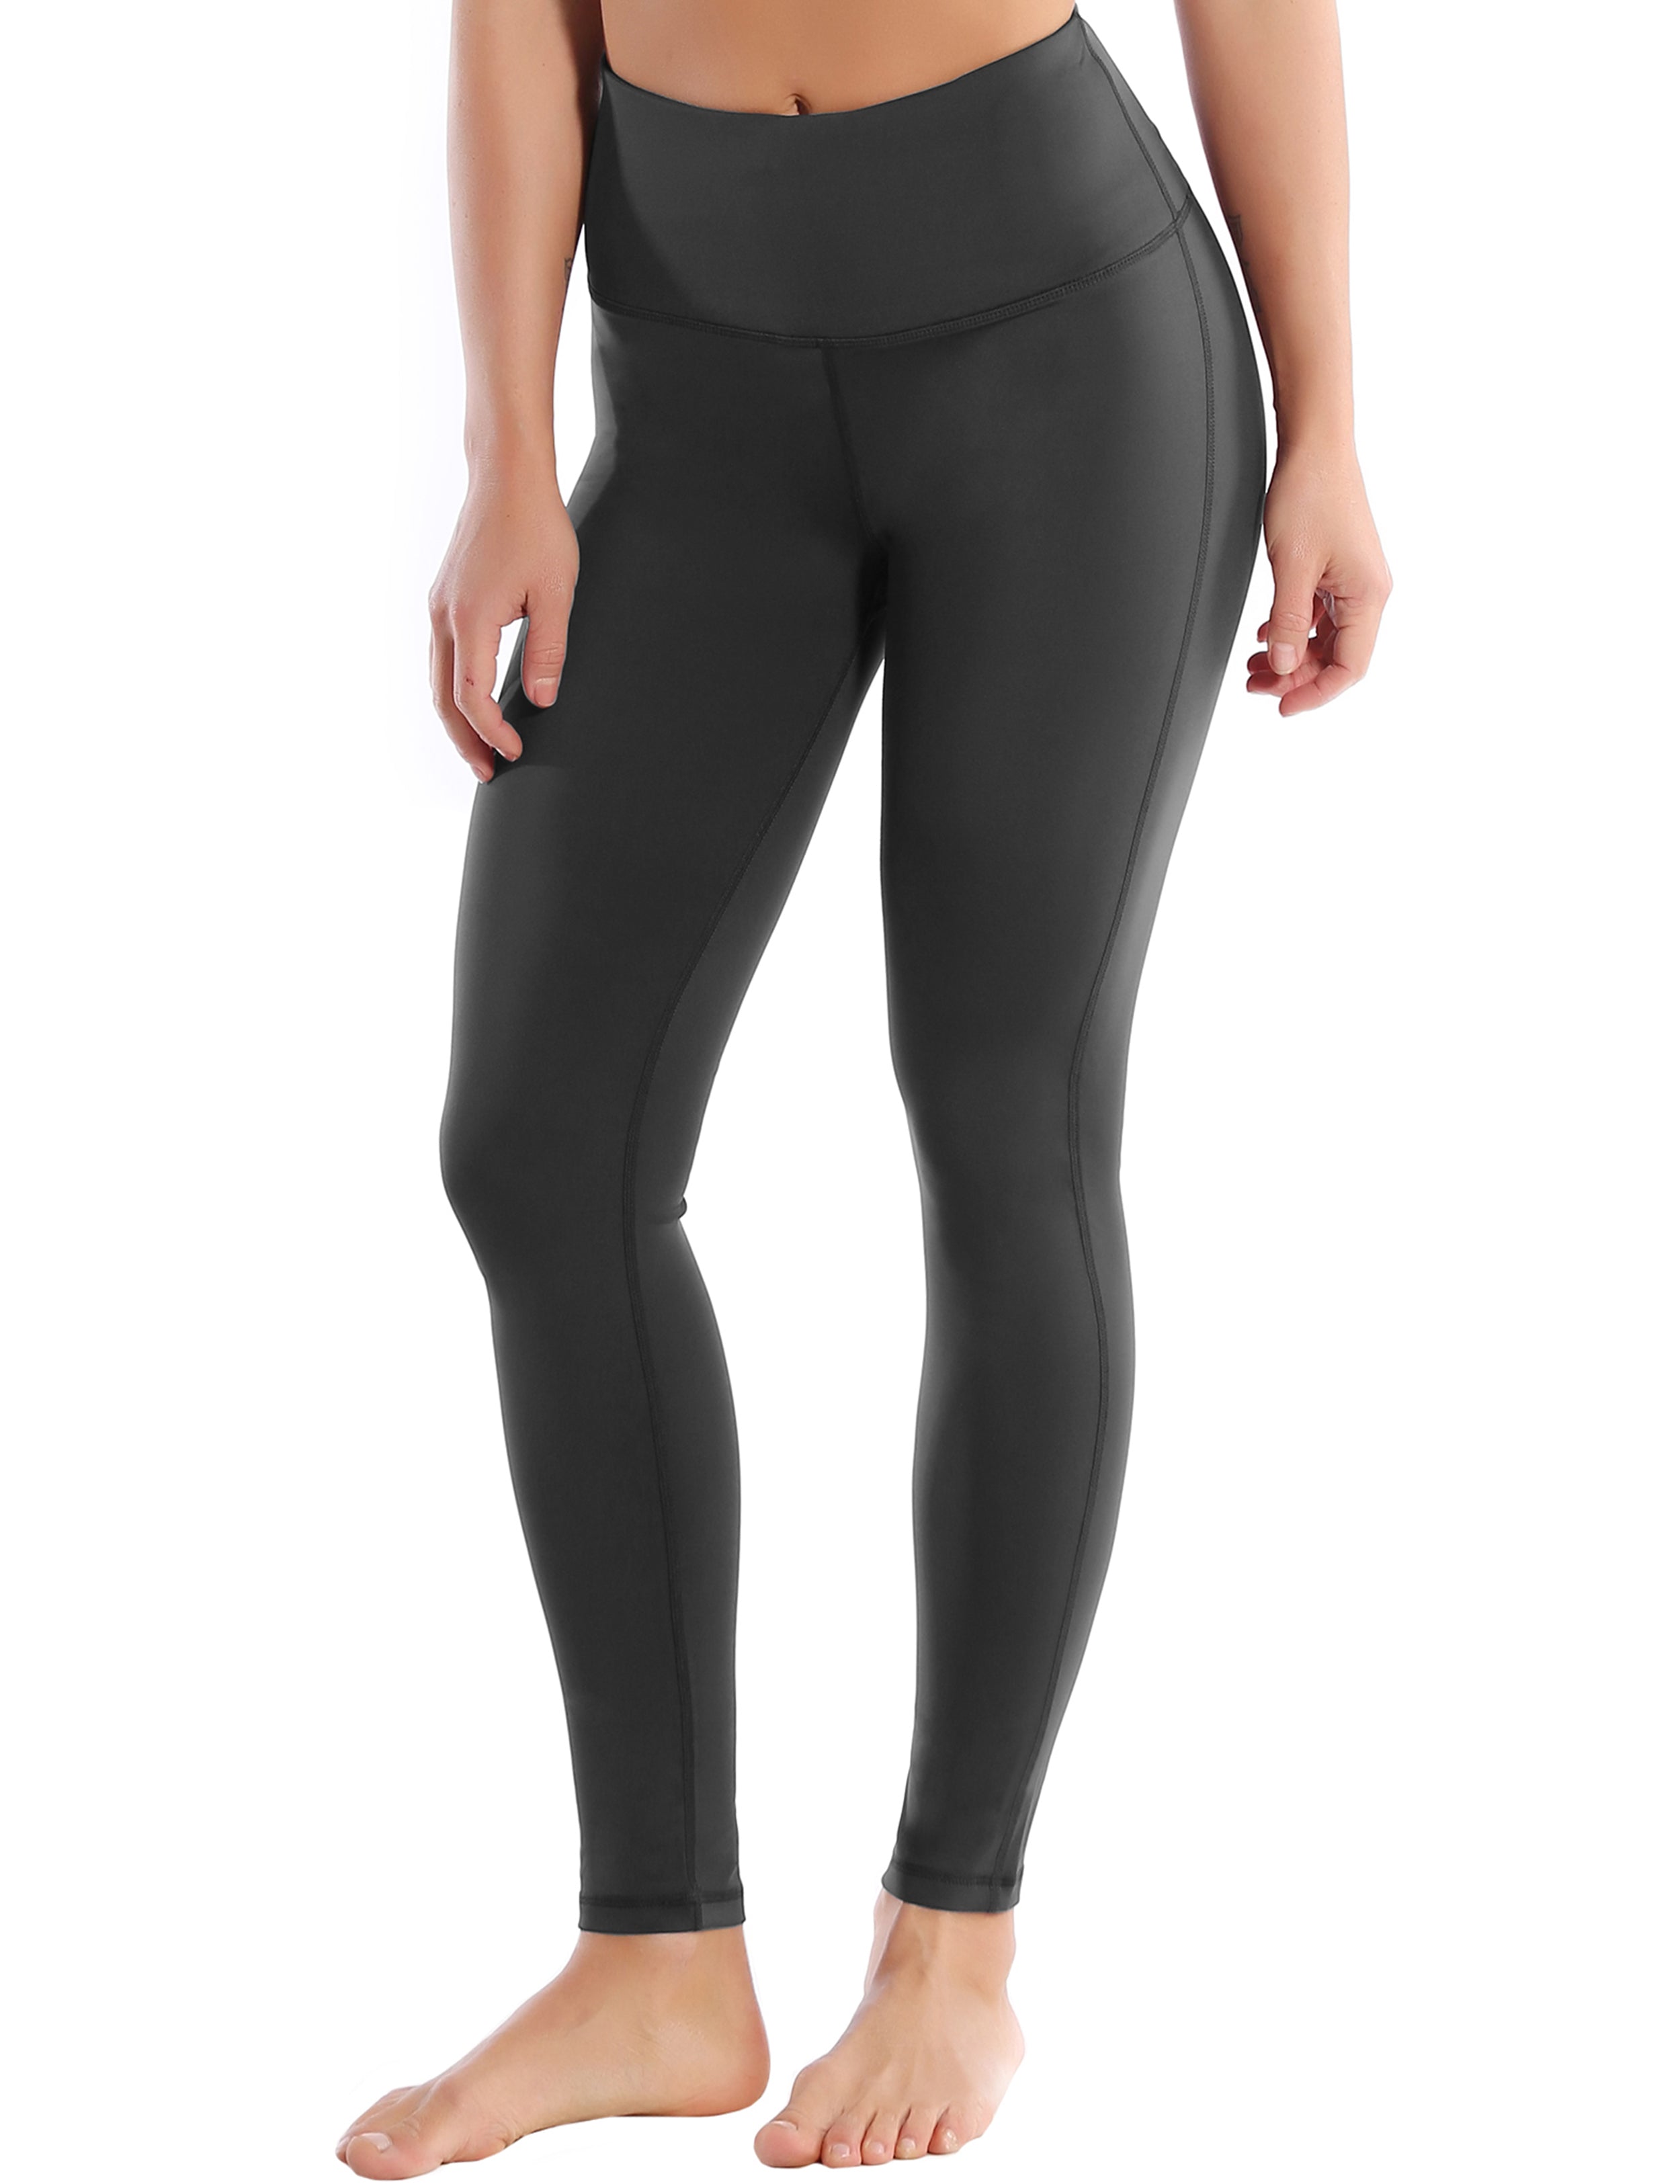 High Waist Side Line Pilates Pants shadowcharcoal Side Line is Make Your Legs Look Longer and Thinner 75%Nylon/25%Spandex Fabric doesn't attract lint easily 4-way stretch No see-through Moisture-wicking Tummy control Inner pocket Two lengths